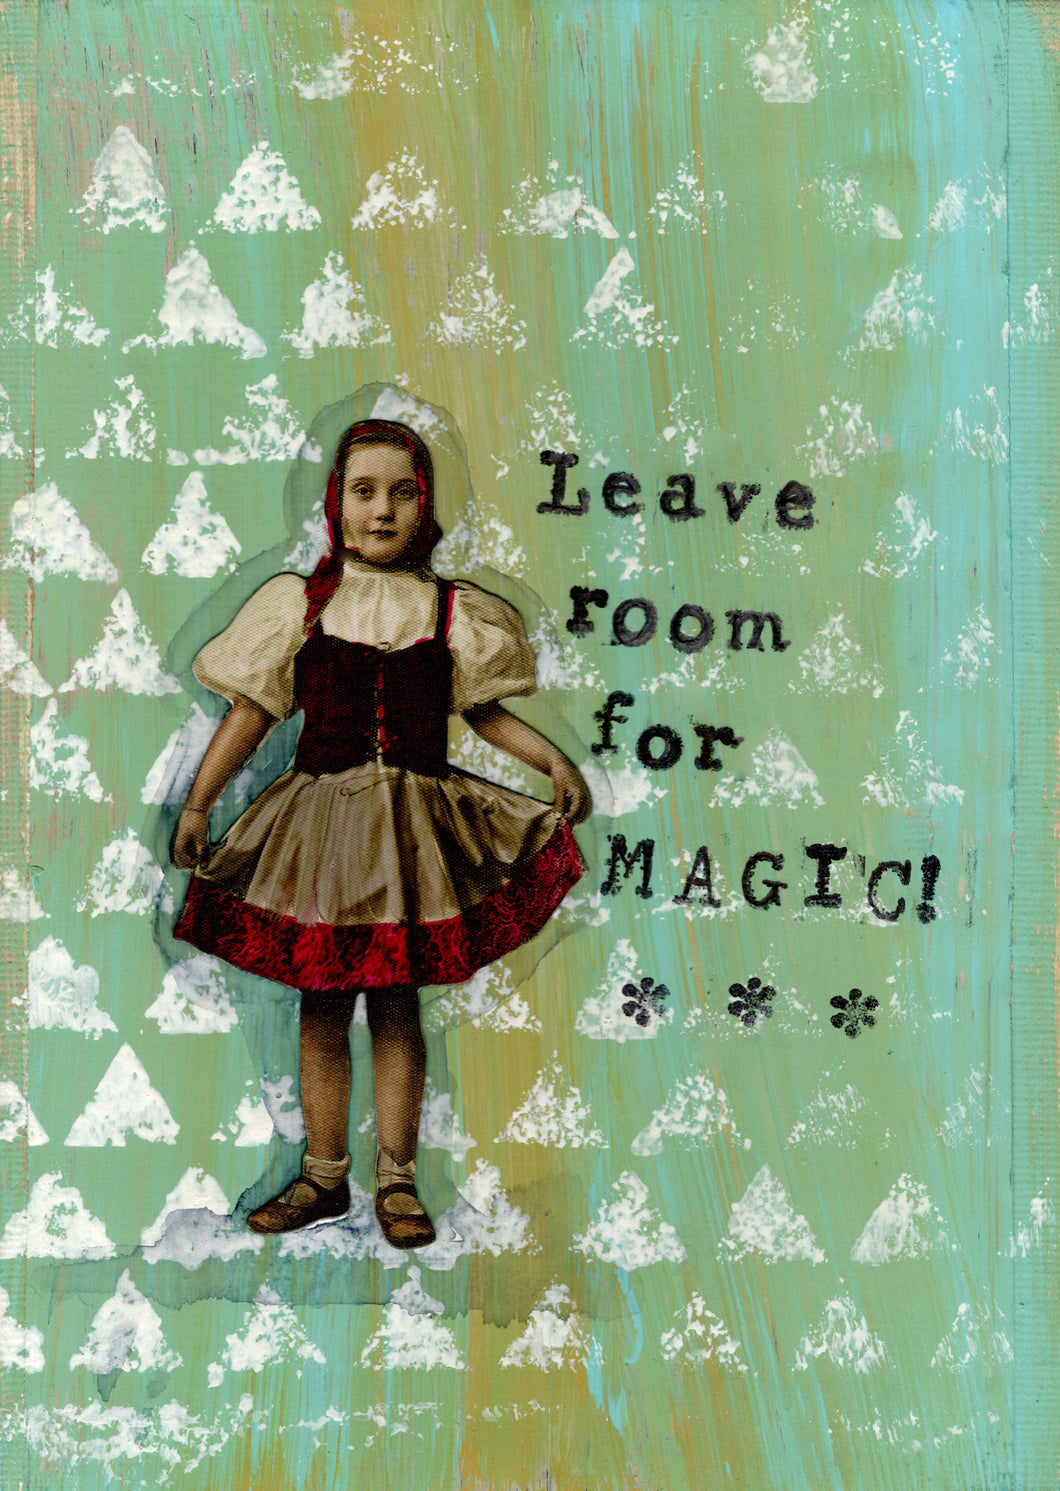 Leave room for magic.